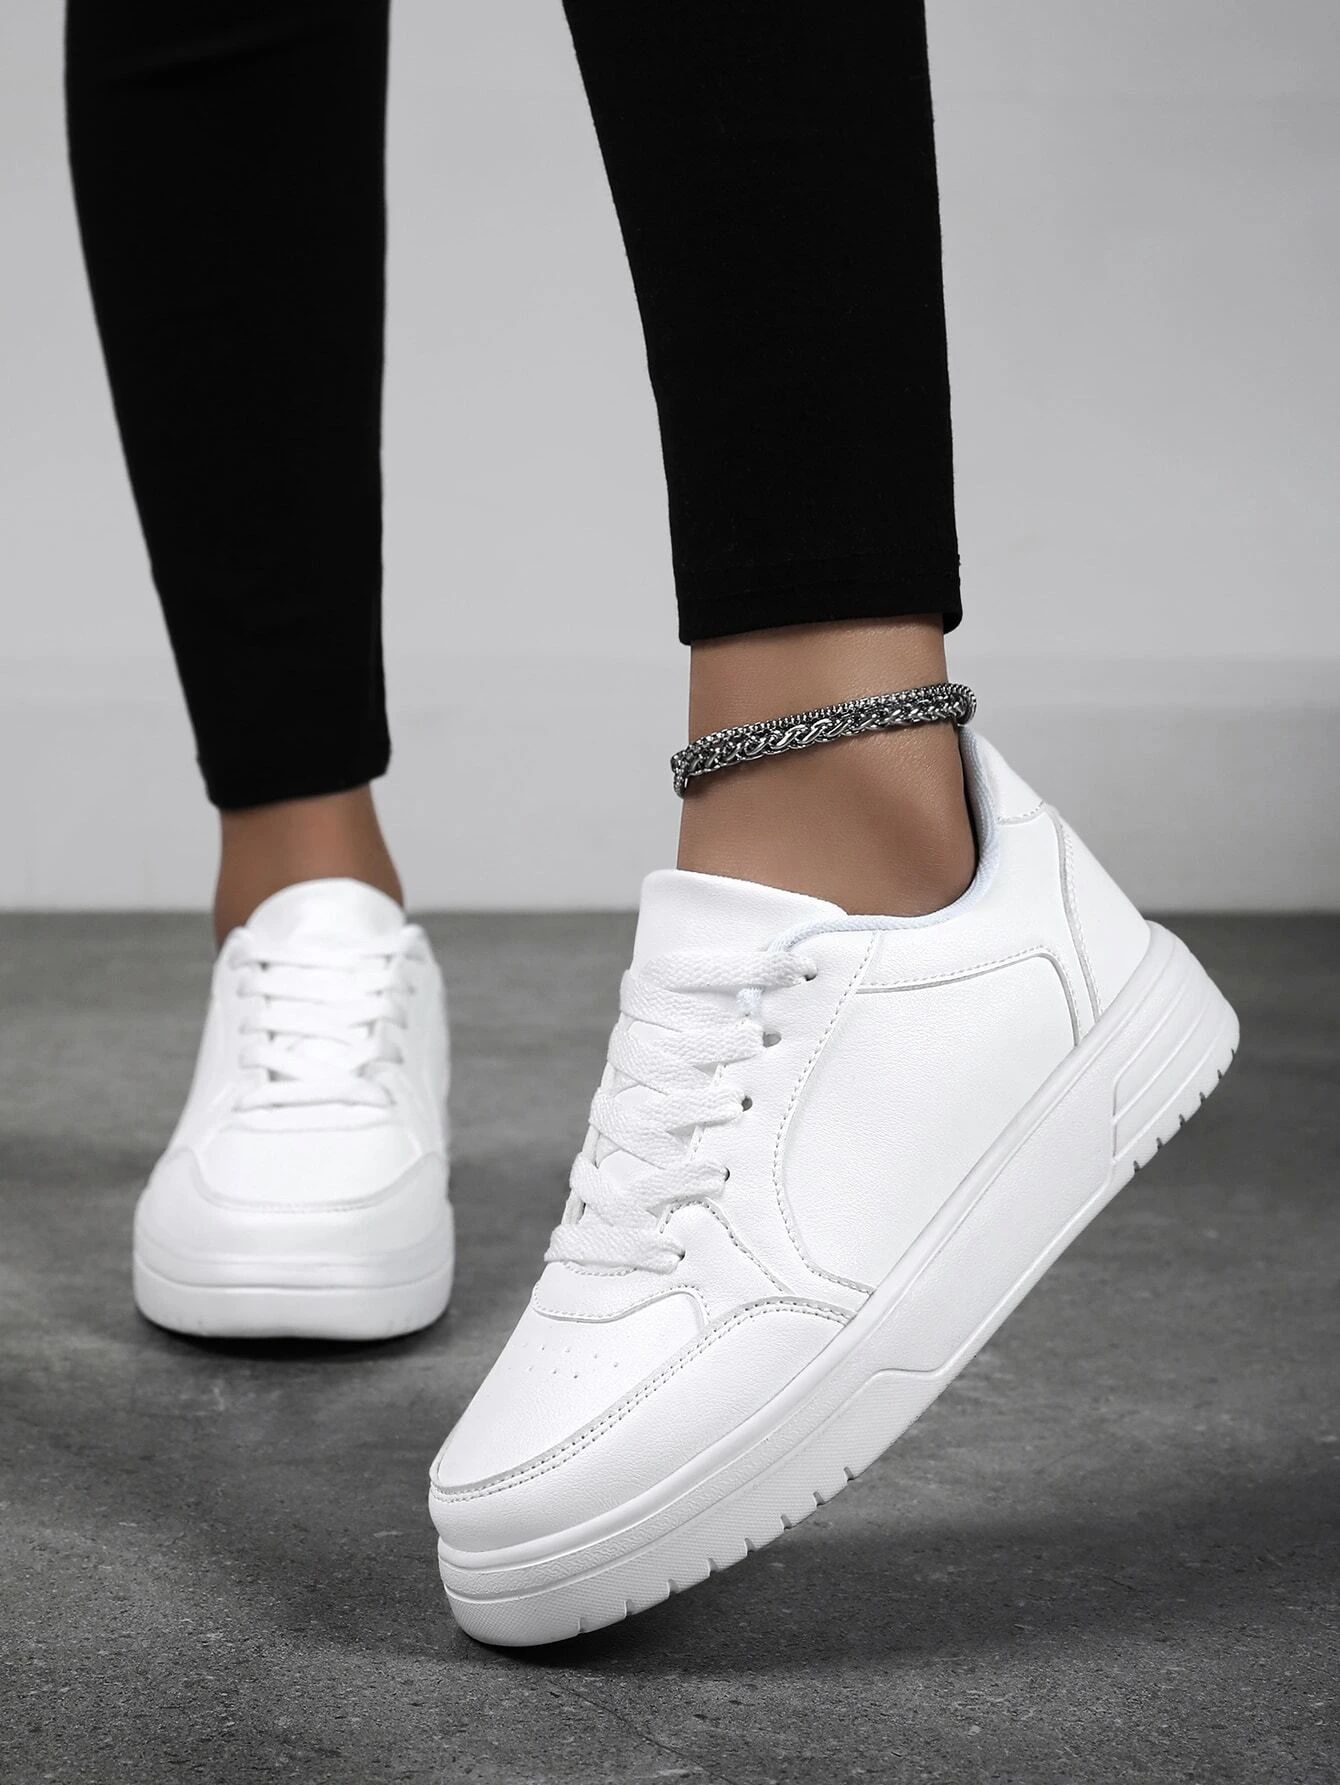 Women Lace Up Skate Shoes, Sporty Outdoor White Sneakers | SHEIN